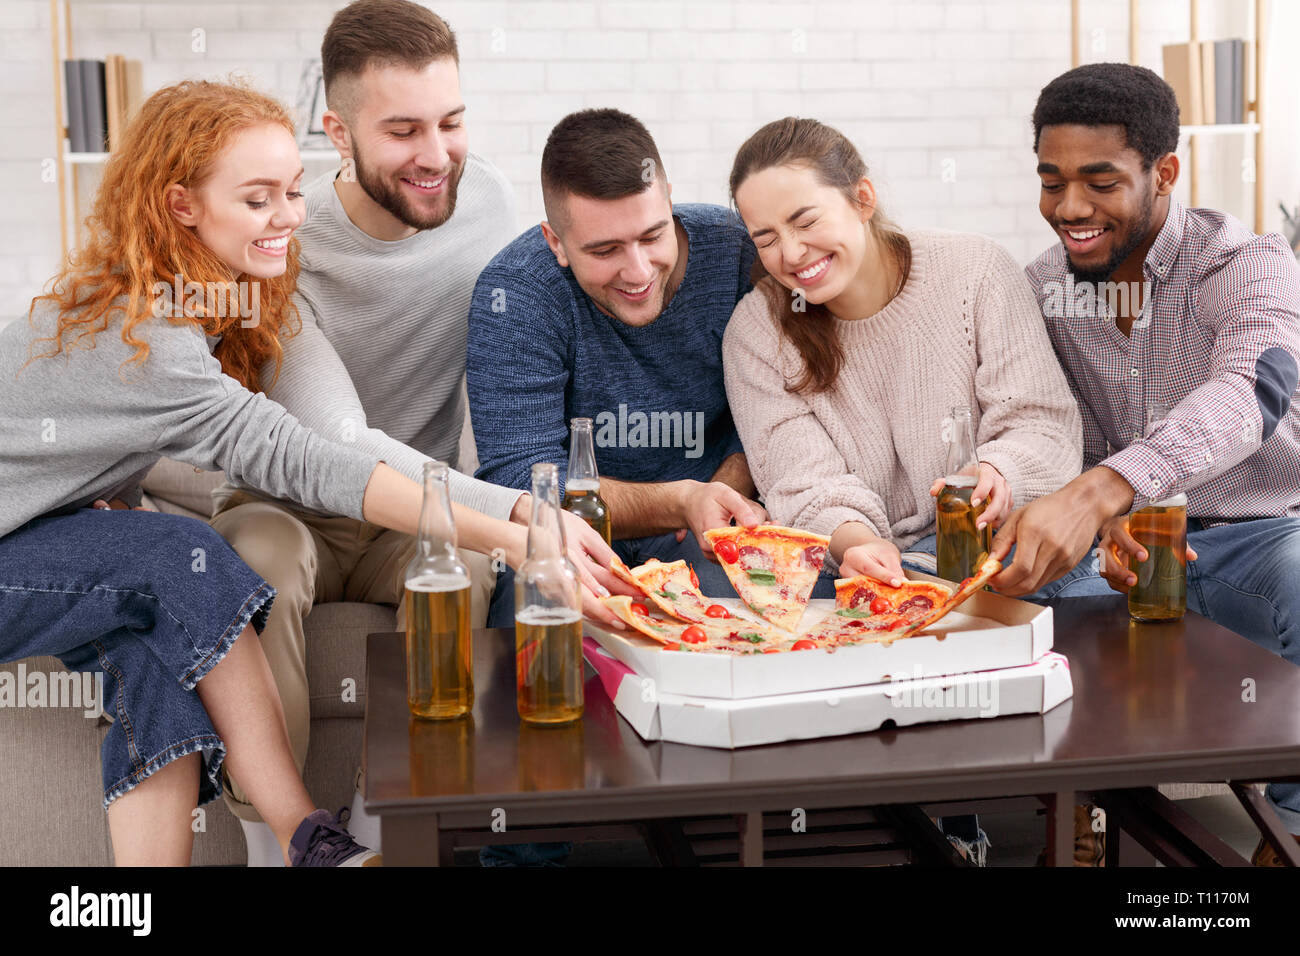 Friends eating pizza. They having fun at home party Stock Photo